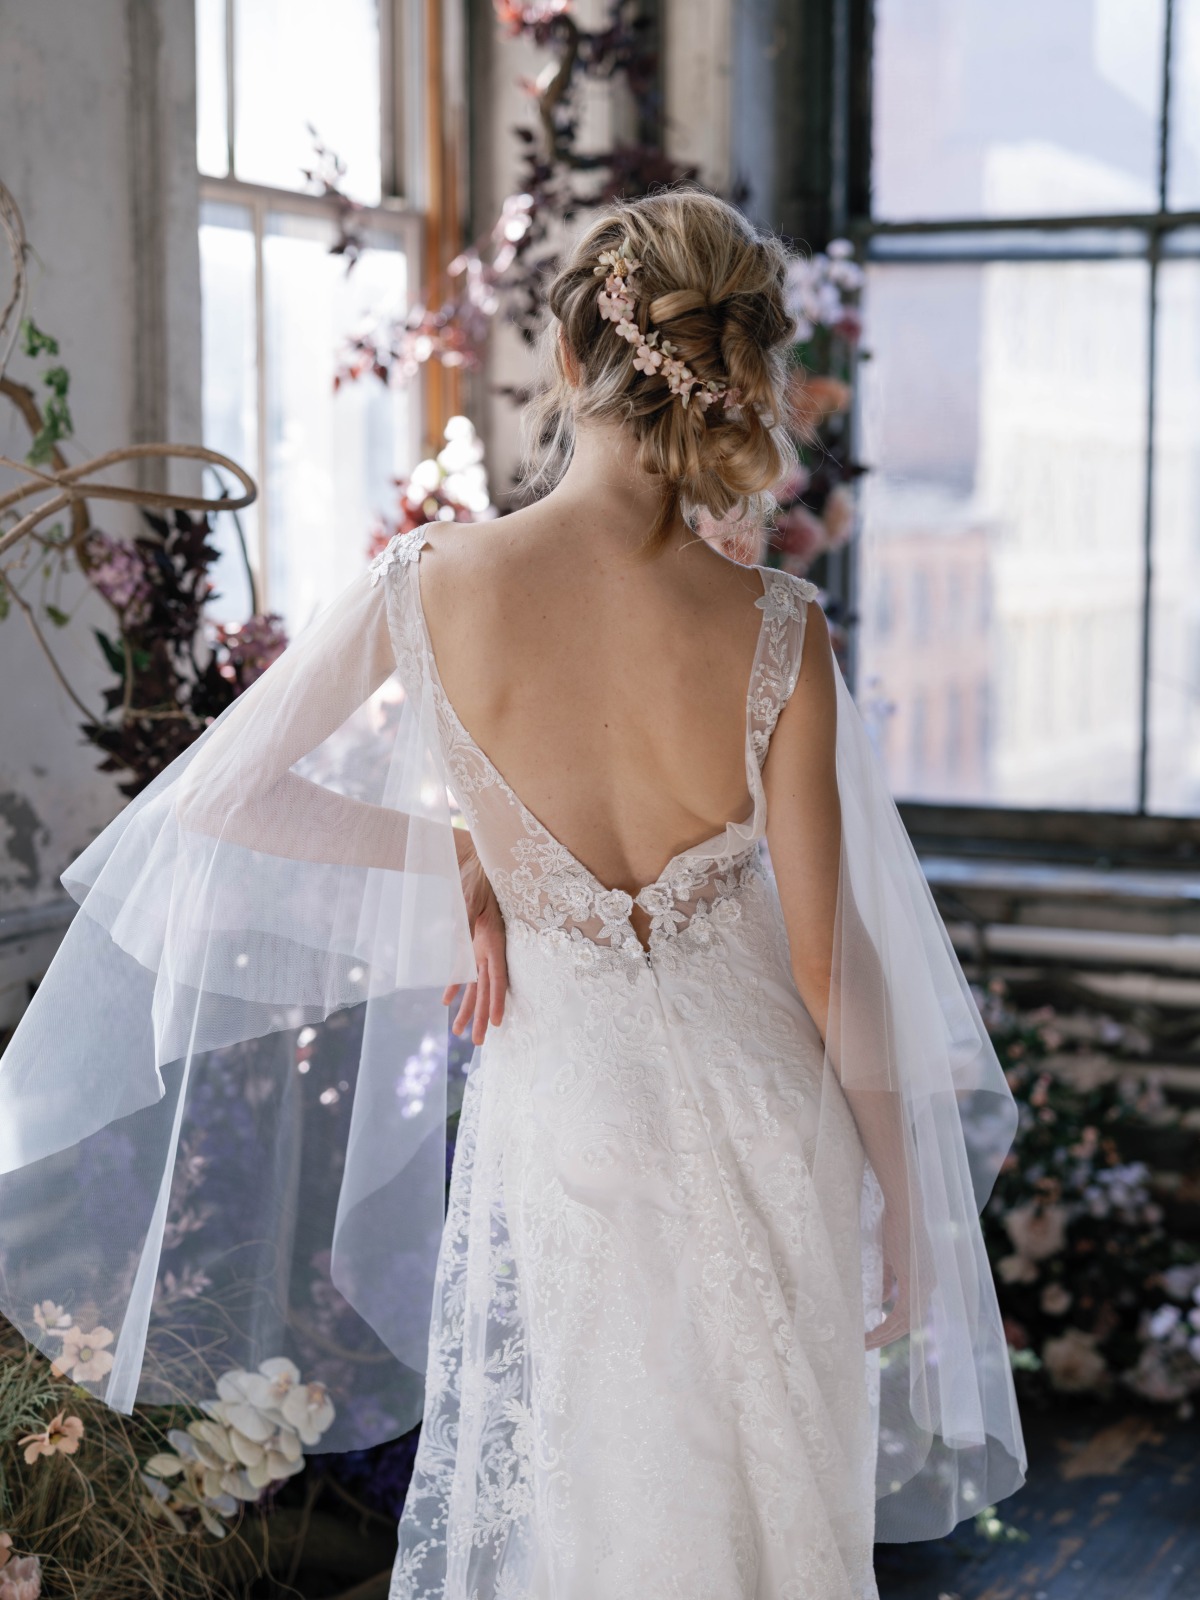 Adorned by Claire Pettibone Crystal